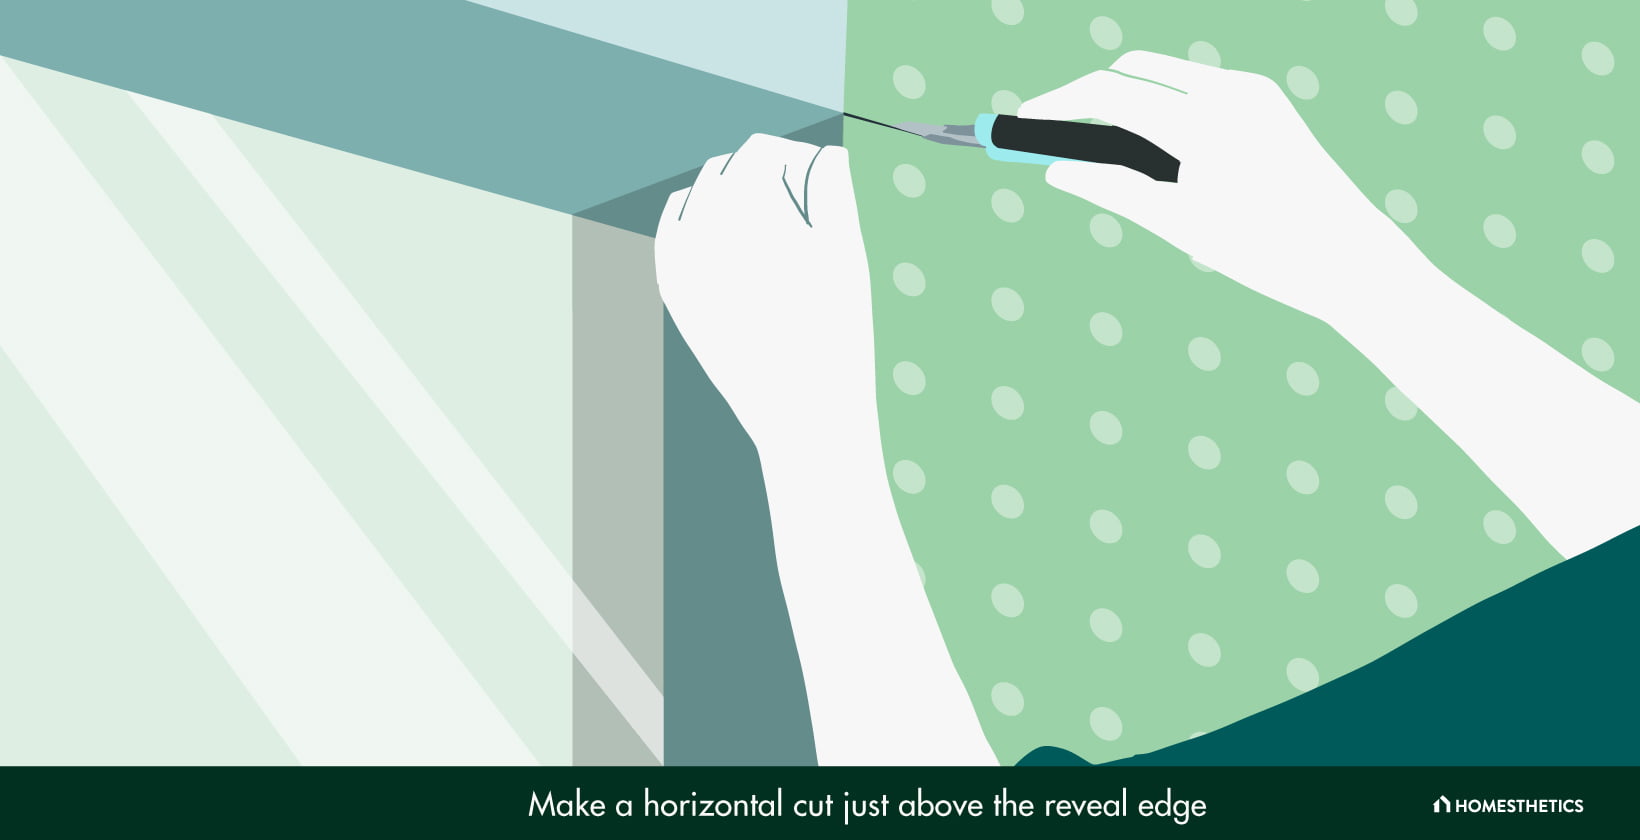 Make a horizontal cut just above the reveal edge